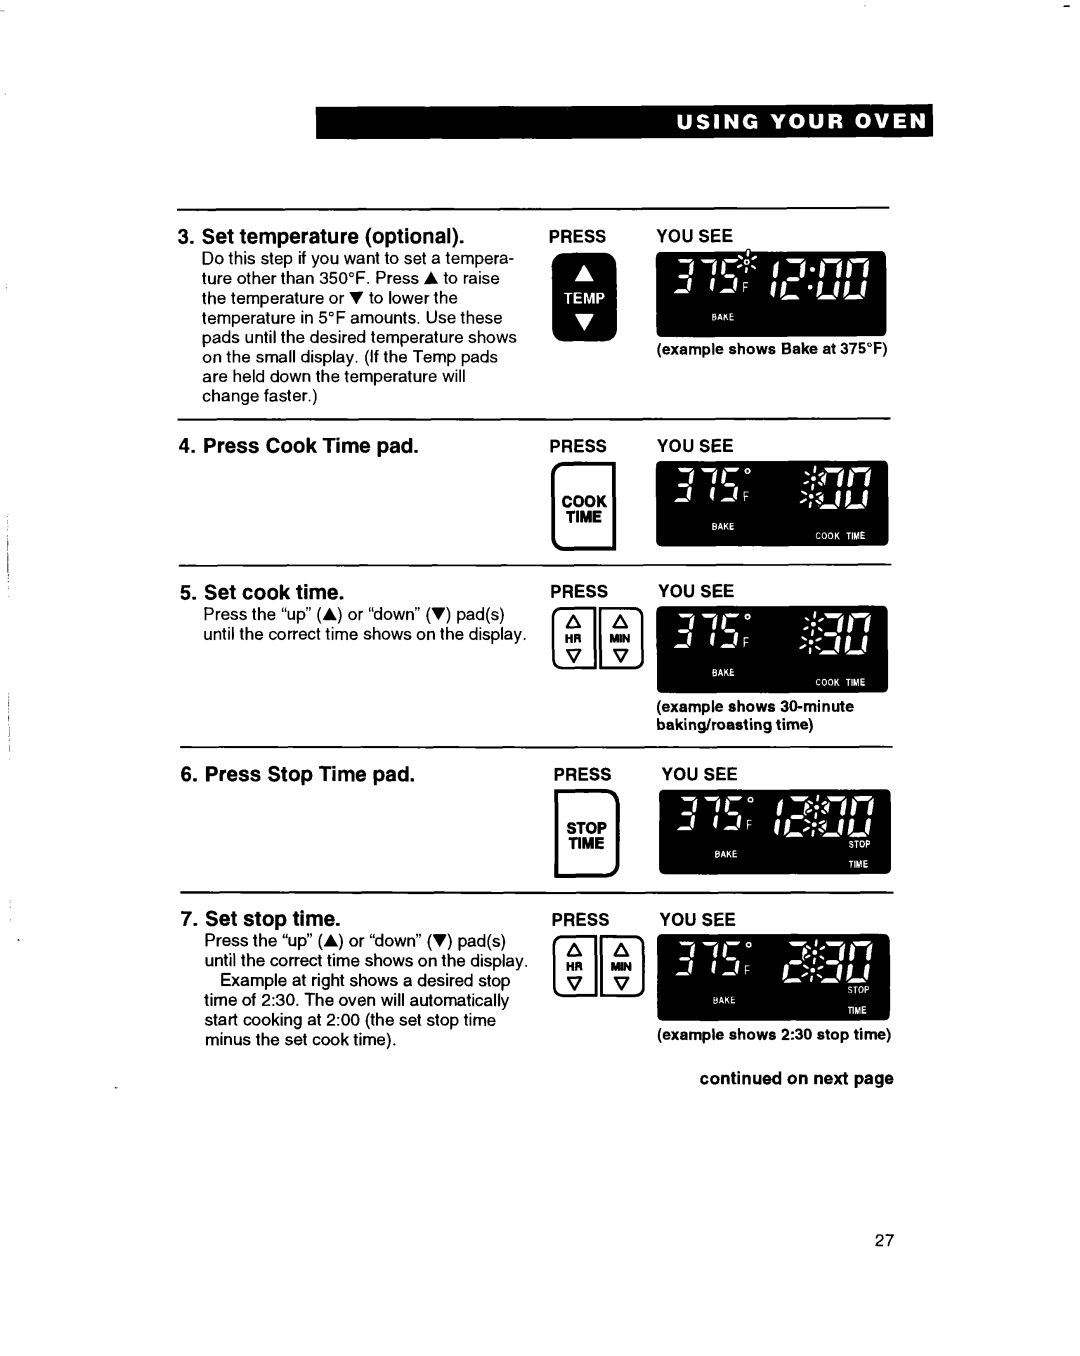 Whirlpool RBS240PD Press Cook Time pad 5.Set cook time, Set temperature optional, Press Stop Time pad, Set stop time 